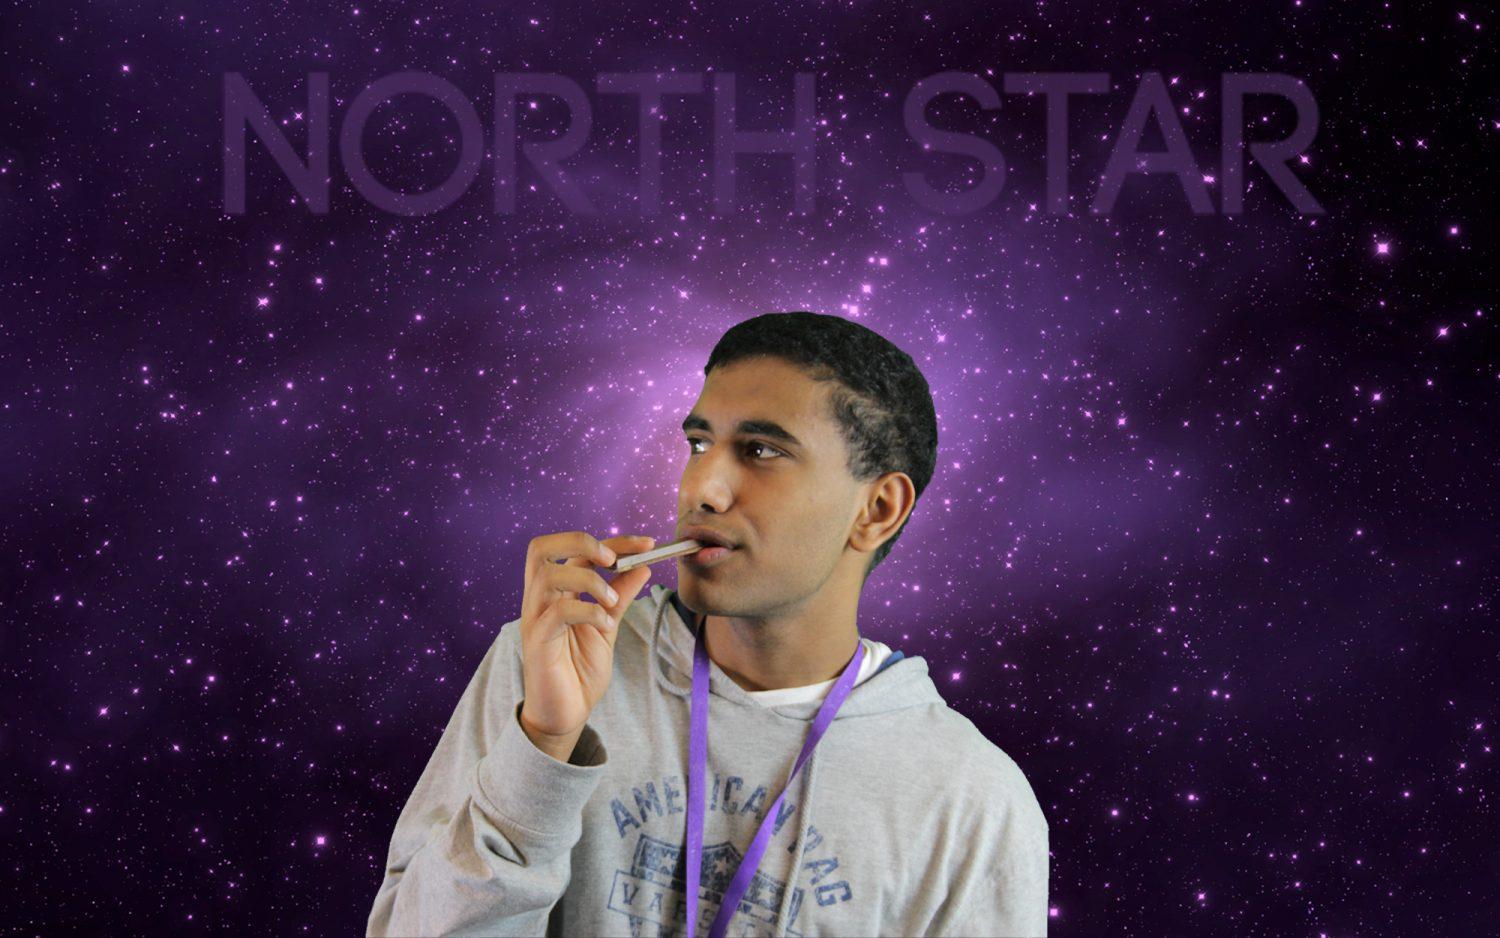 Student activities night: North Star takes students to space